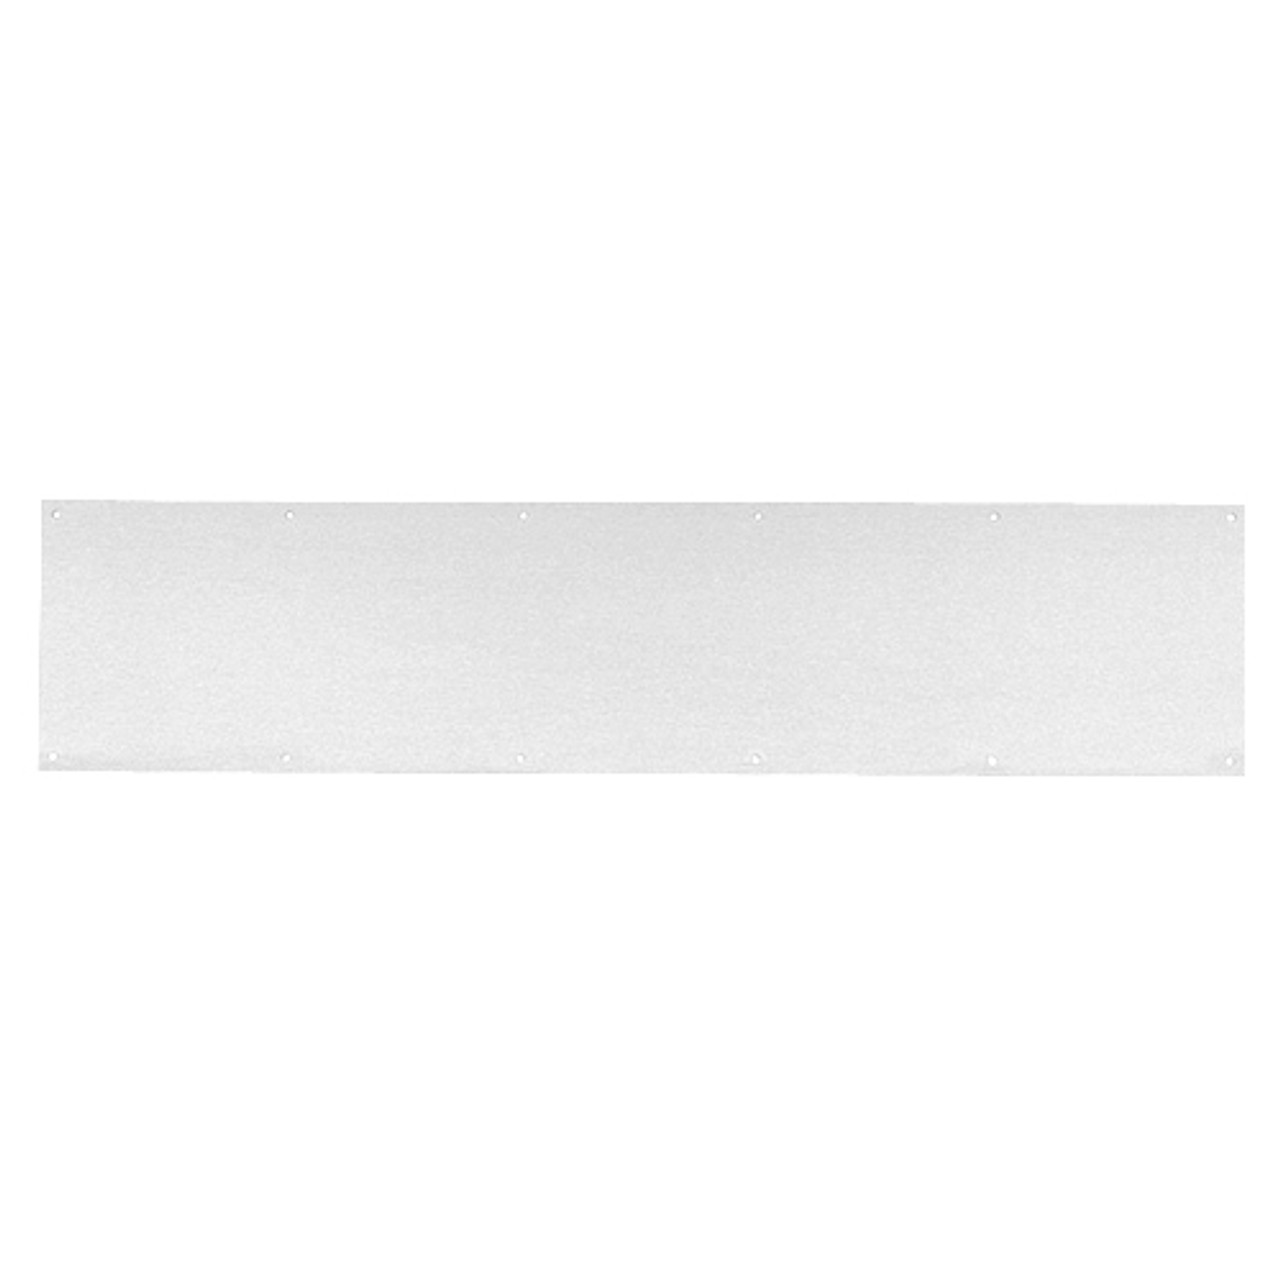 8400-US28-8x46-B-CS Ives 8400 Series Protection Plate in Aluminum